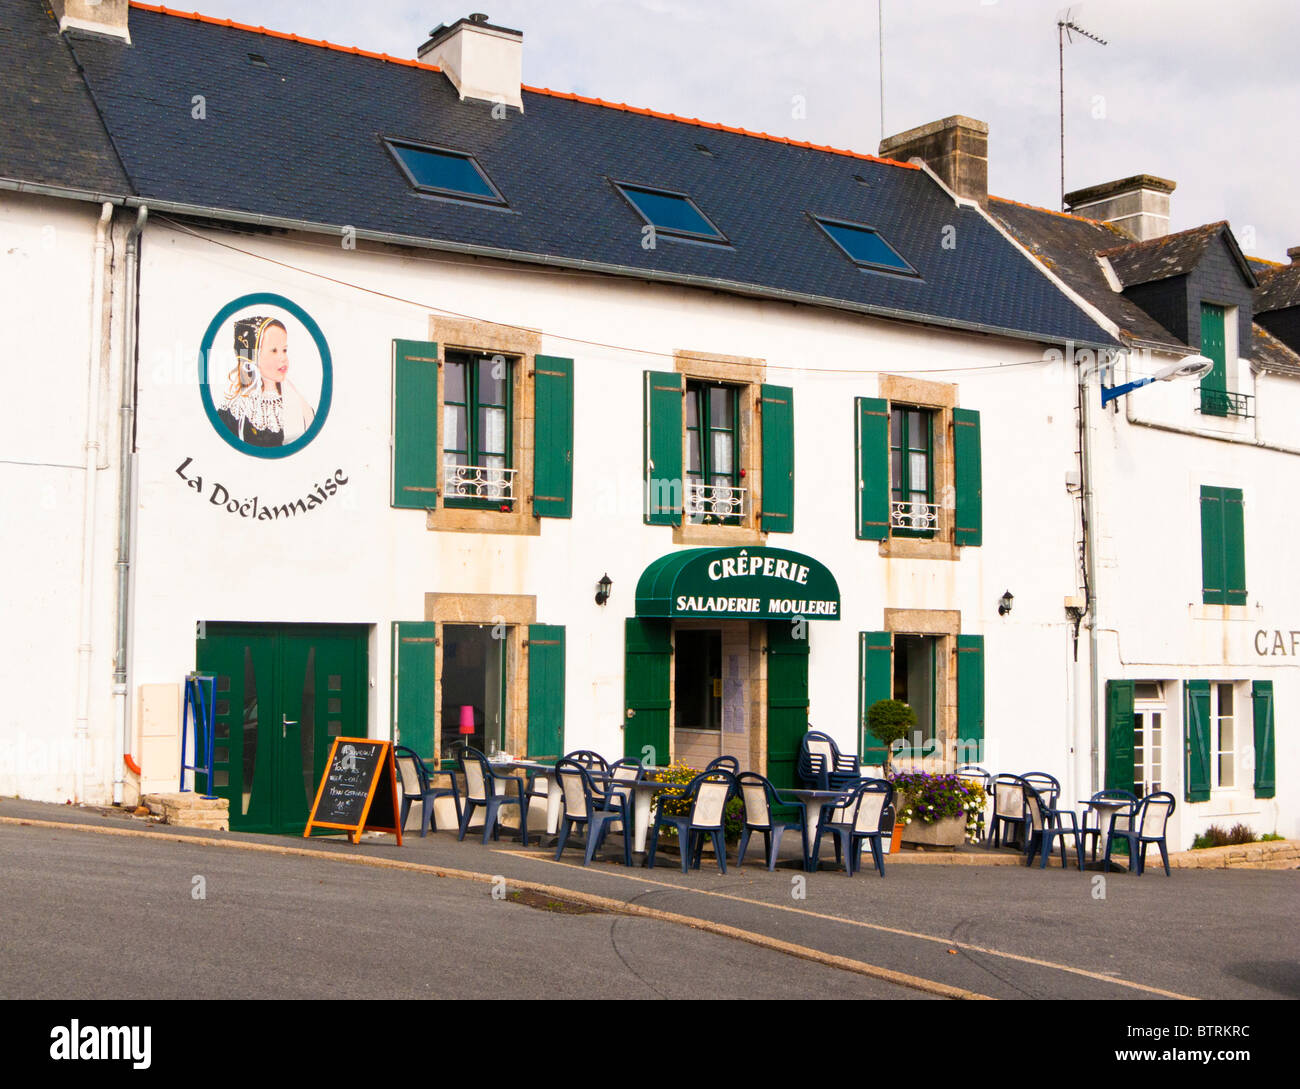 Creperie, Doelan, Finistere, Brittany, France, Europe Stock Photo